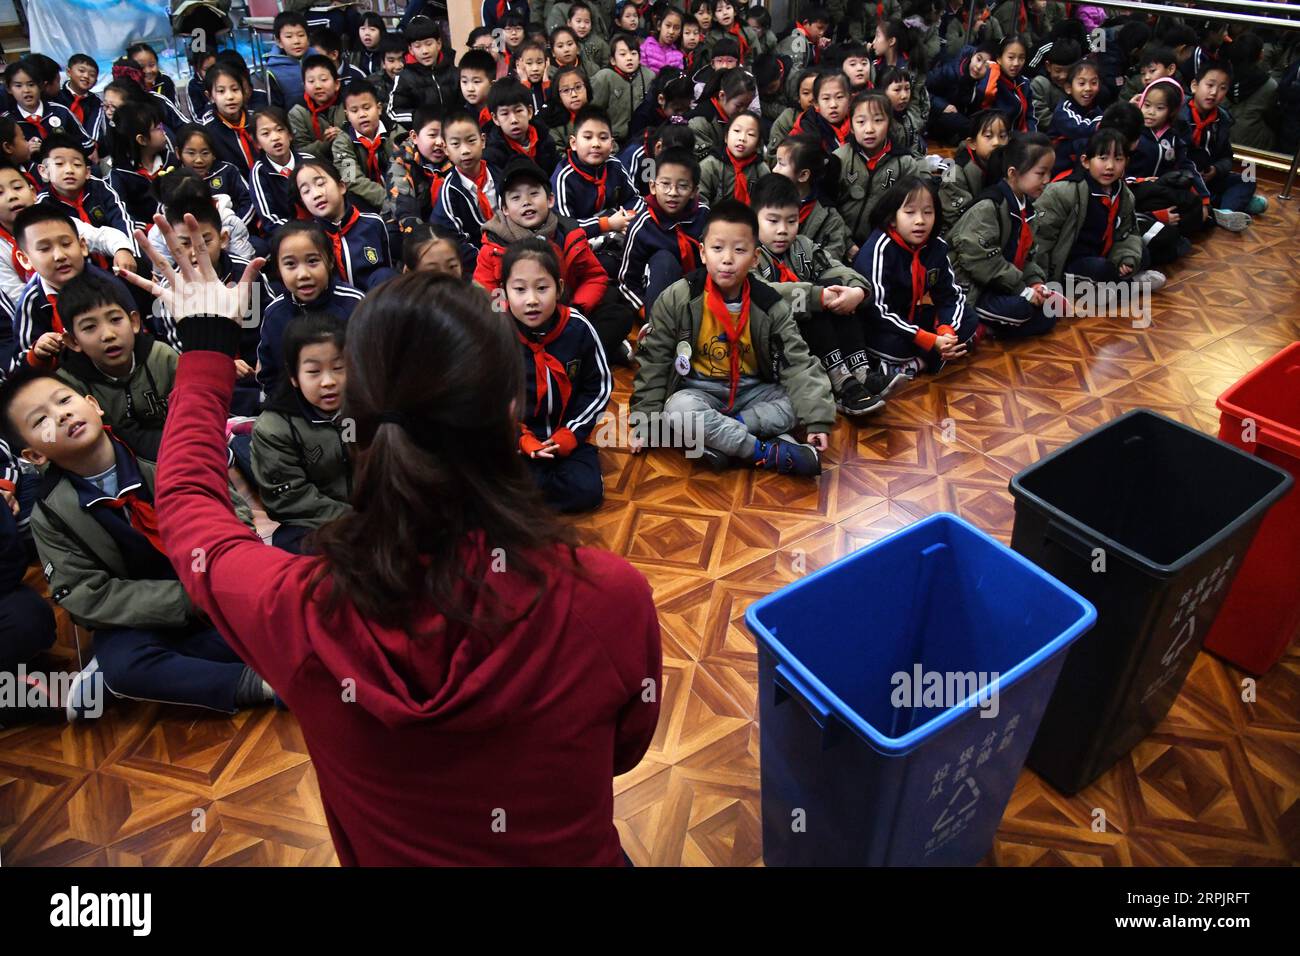 191218 -- QINGDAO, Dec. 18, 2019 -- A volunteer teaches pupils about garbage classification at the Juyuan Primary School in Qingdao City, east China s Shandong Province, Dec. 18, 2019. Youth volunteers for social service from the Qingdao Zhanqiao Bookstore launched a scientific information outreach program at the Juyuan Primary School Wednesday. Through video clips, knowledge contests, short dramas and amusing games, the volunteers attempted to help the pupils better understand the necessity of garbage classification as well as the importance of environmental and ecological protection.  CHINA- Stock Photo